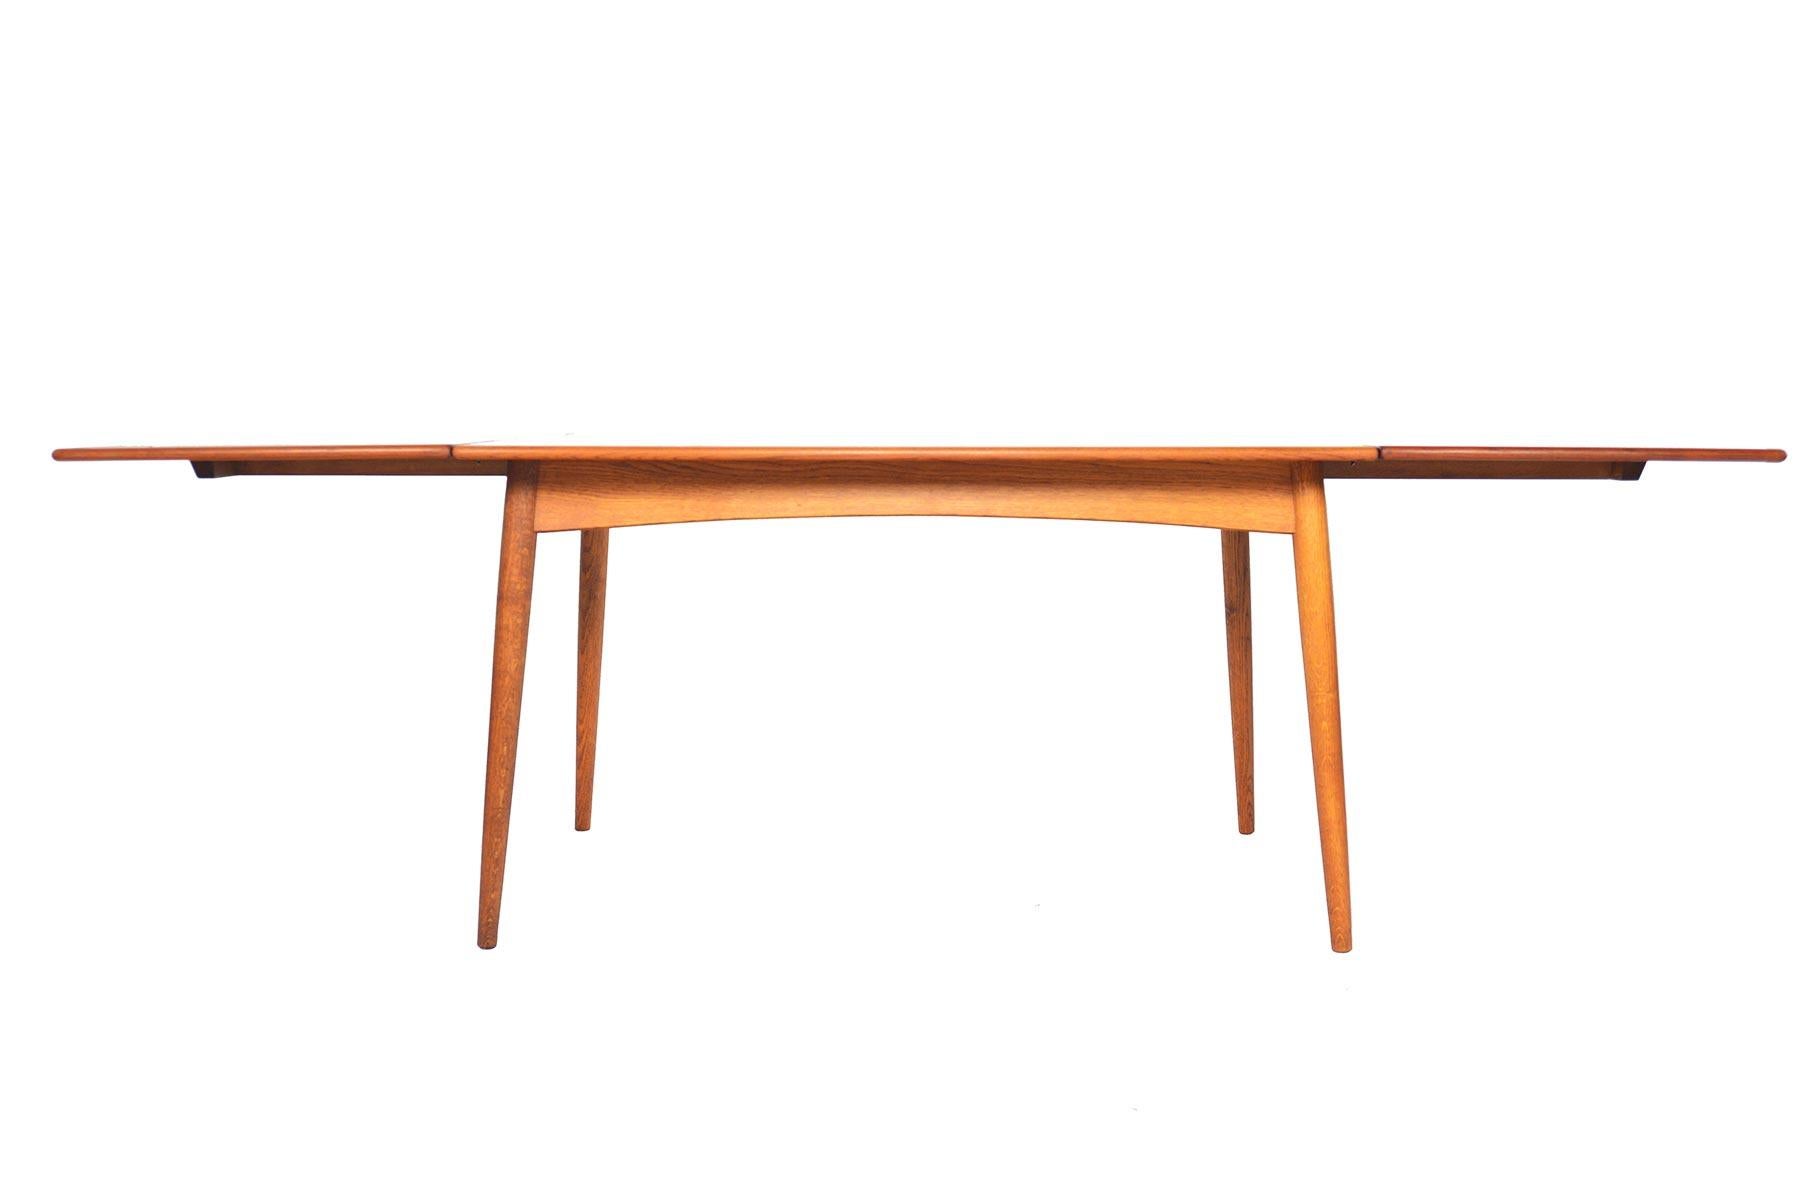 This stunning Danish modern dining table was designed by Hans J. Wegner for Andreas Tuck in the 1950s. The beautifully banded teak table top stands on a solid, quarter- sawn oak base. Each side of the table offers hardware to support leaves. Table